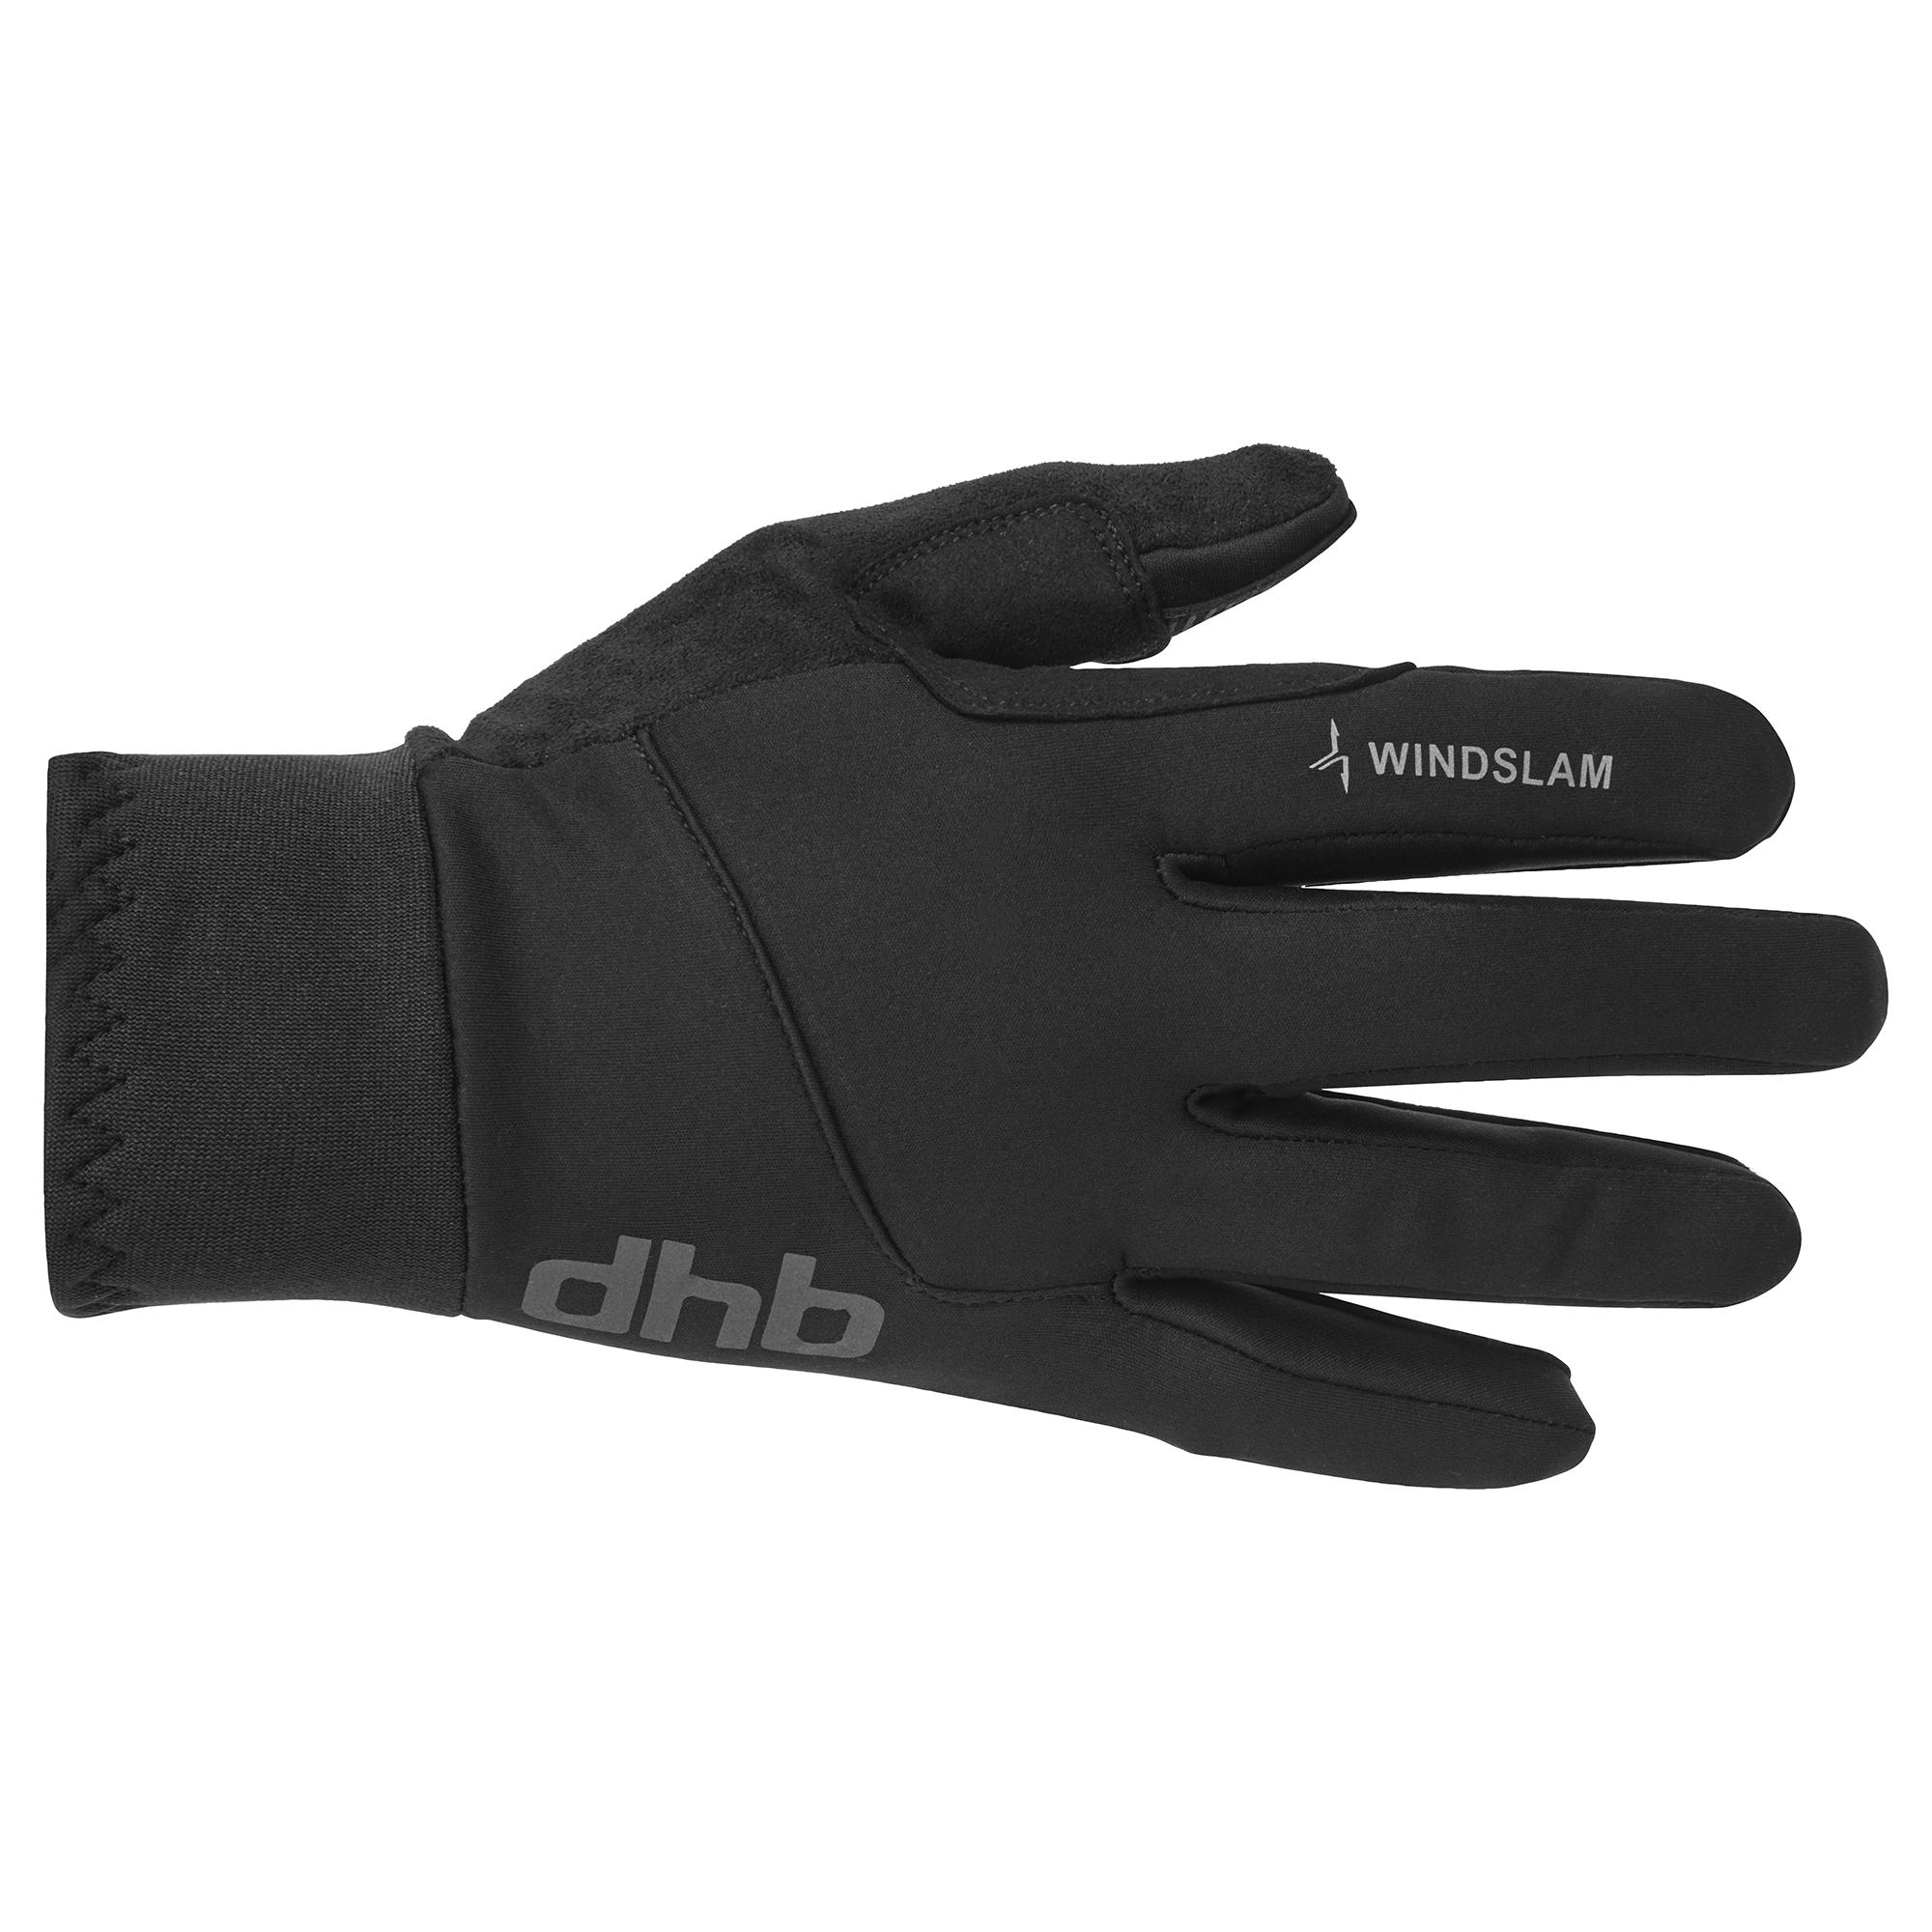 Dhb Windproof Cycling Gloves - Black